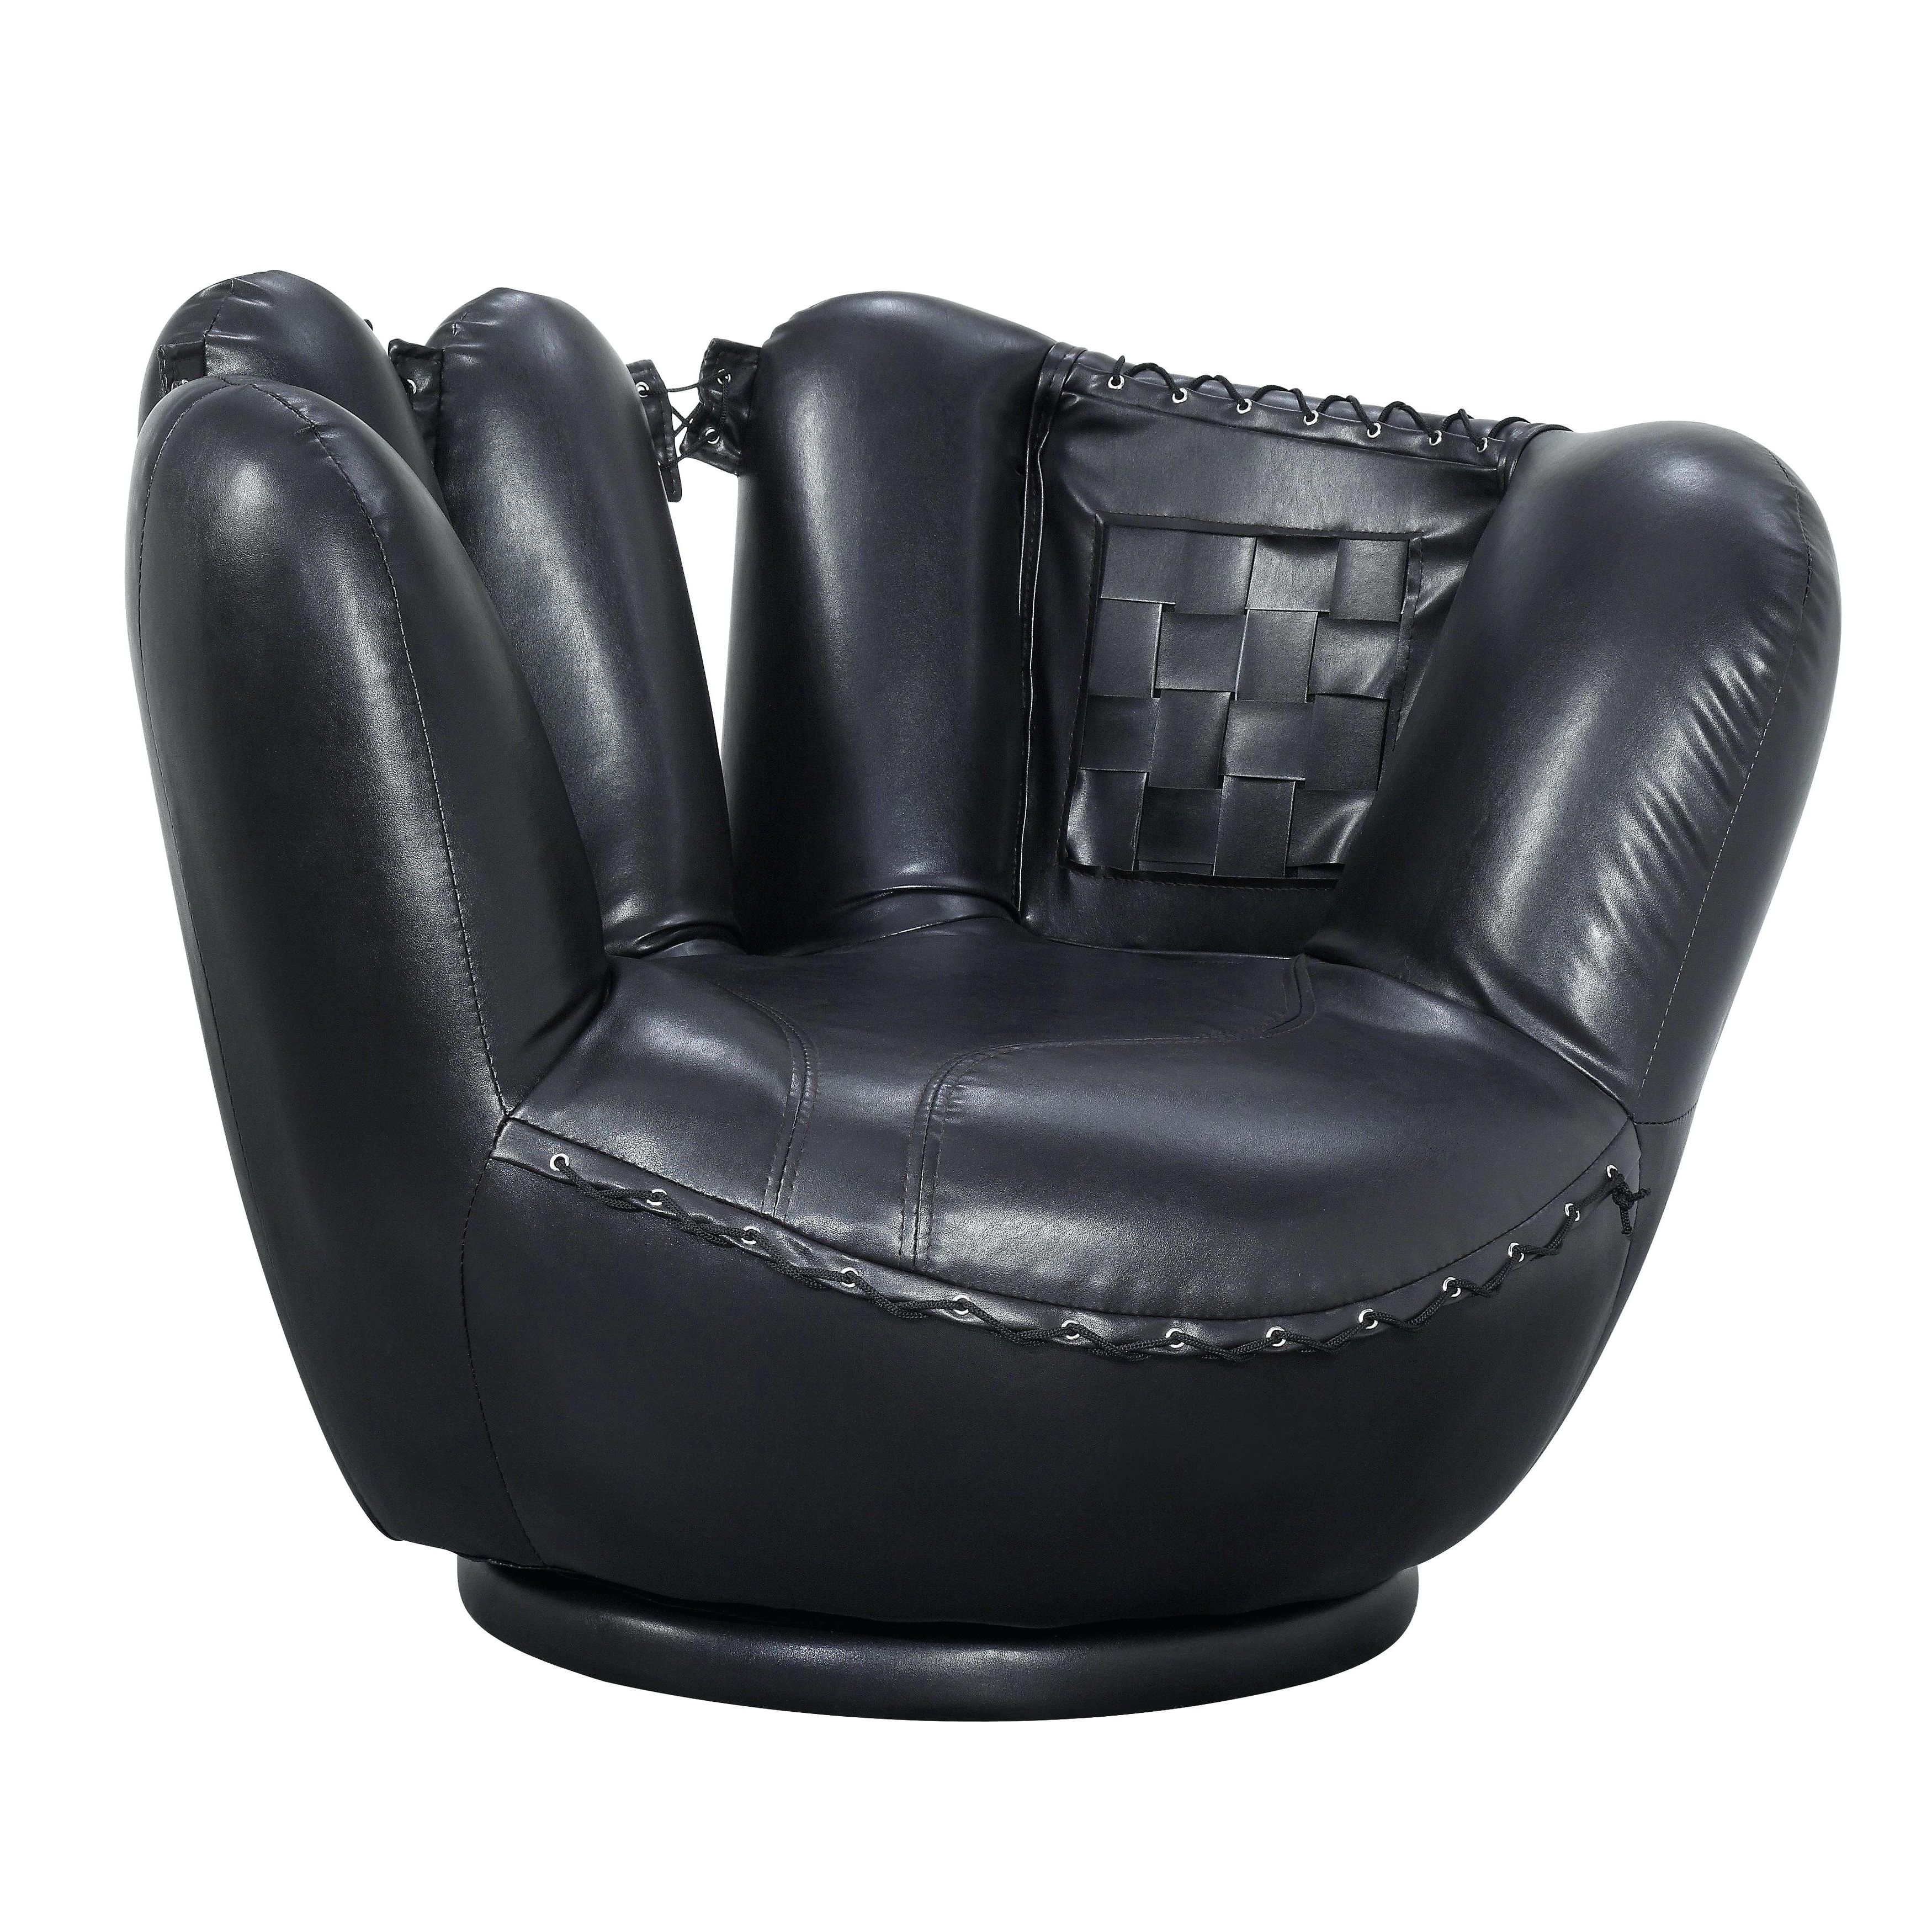 Well Known Toddler Sofa Chairs Within Exotic Toddler Chairs Baseball Swivel Chair W Ottoman Toddler Sofa (View 14 of 20)